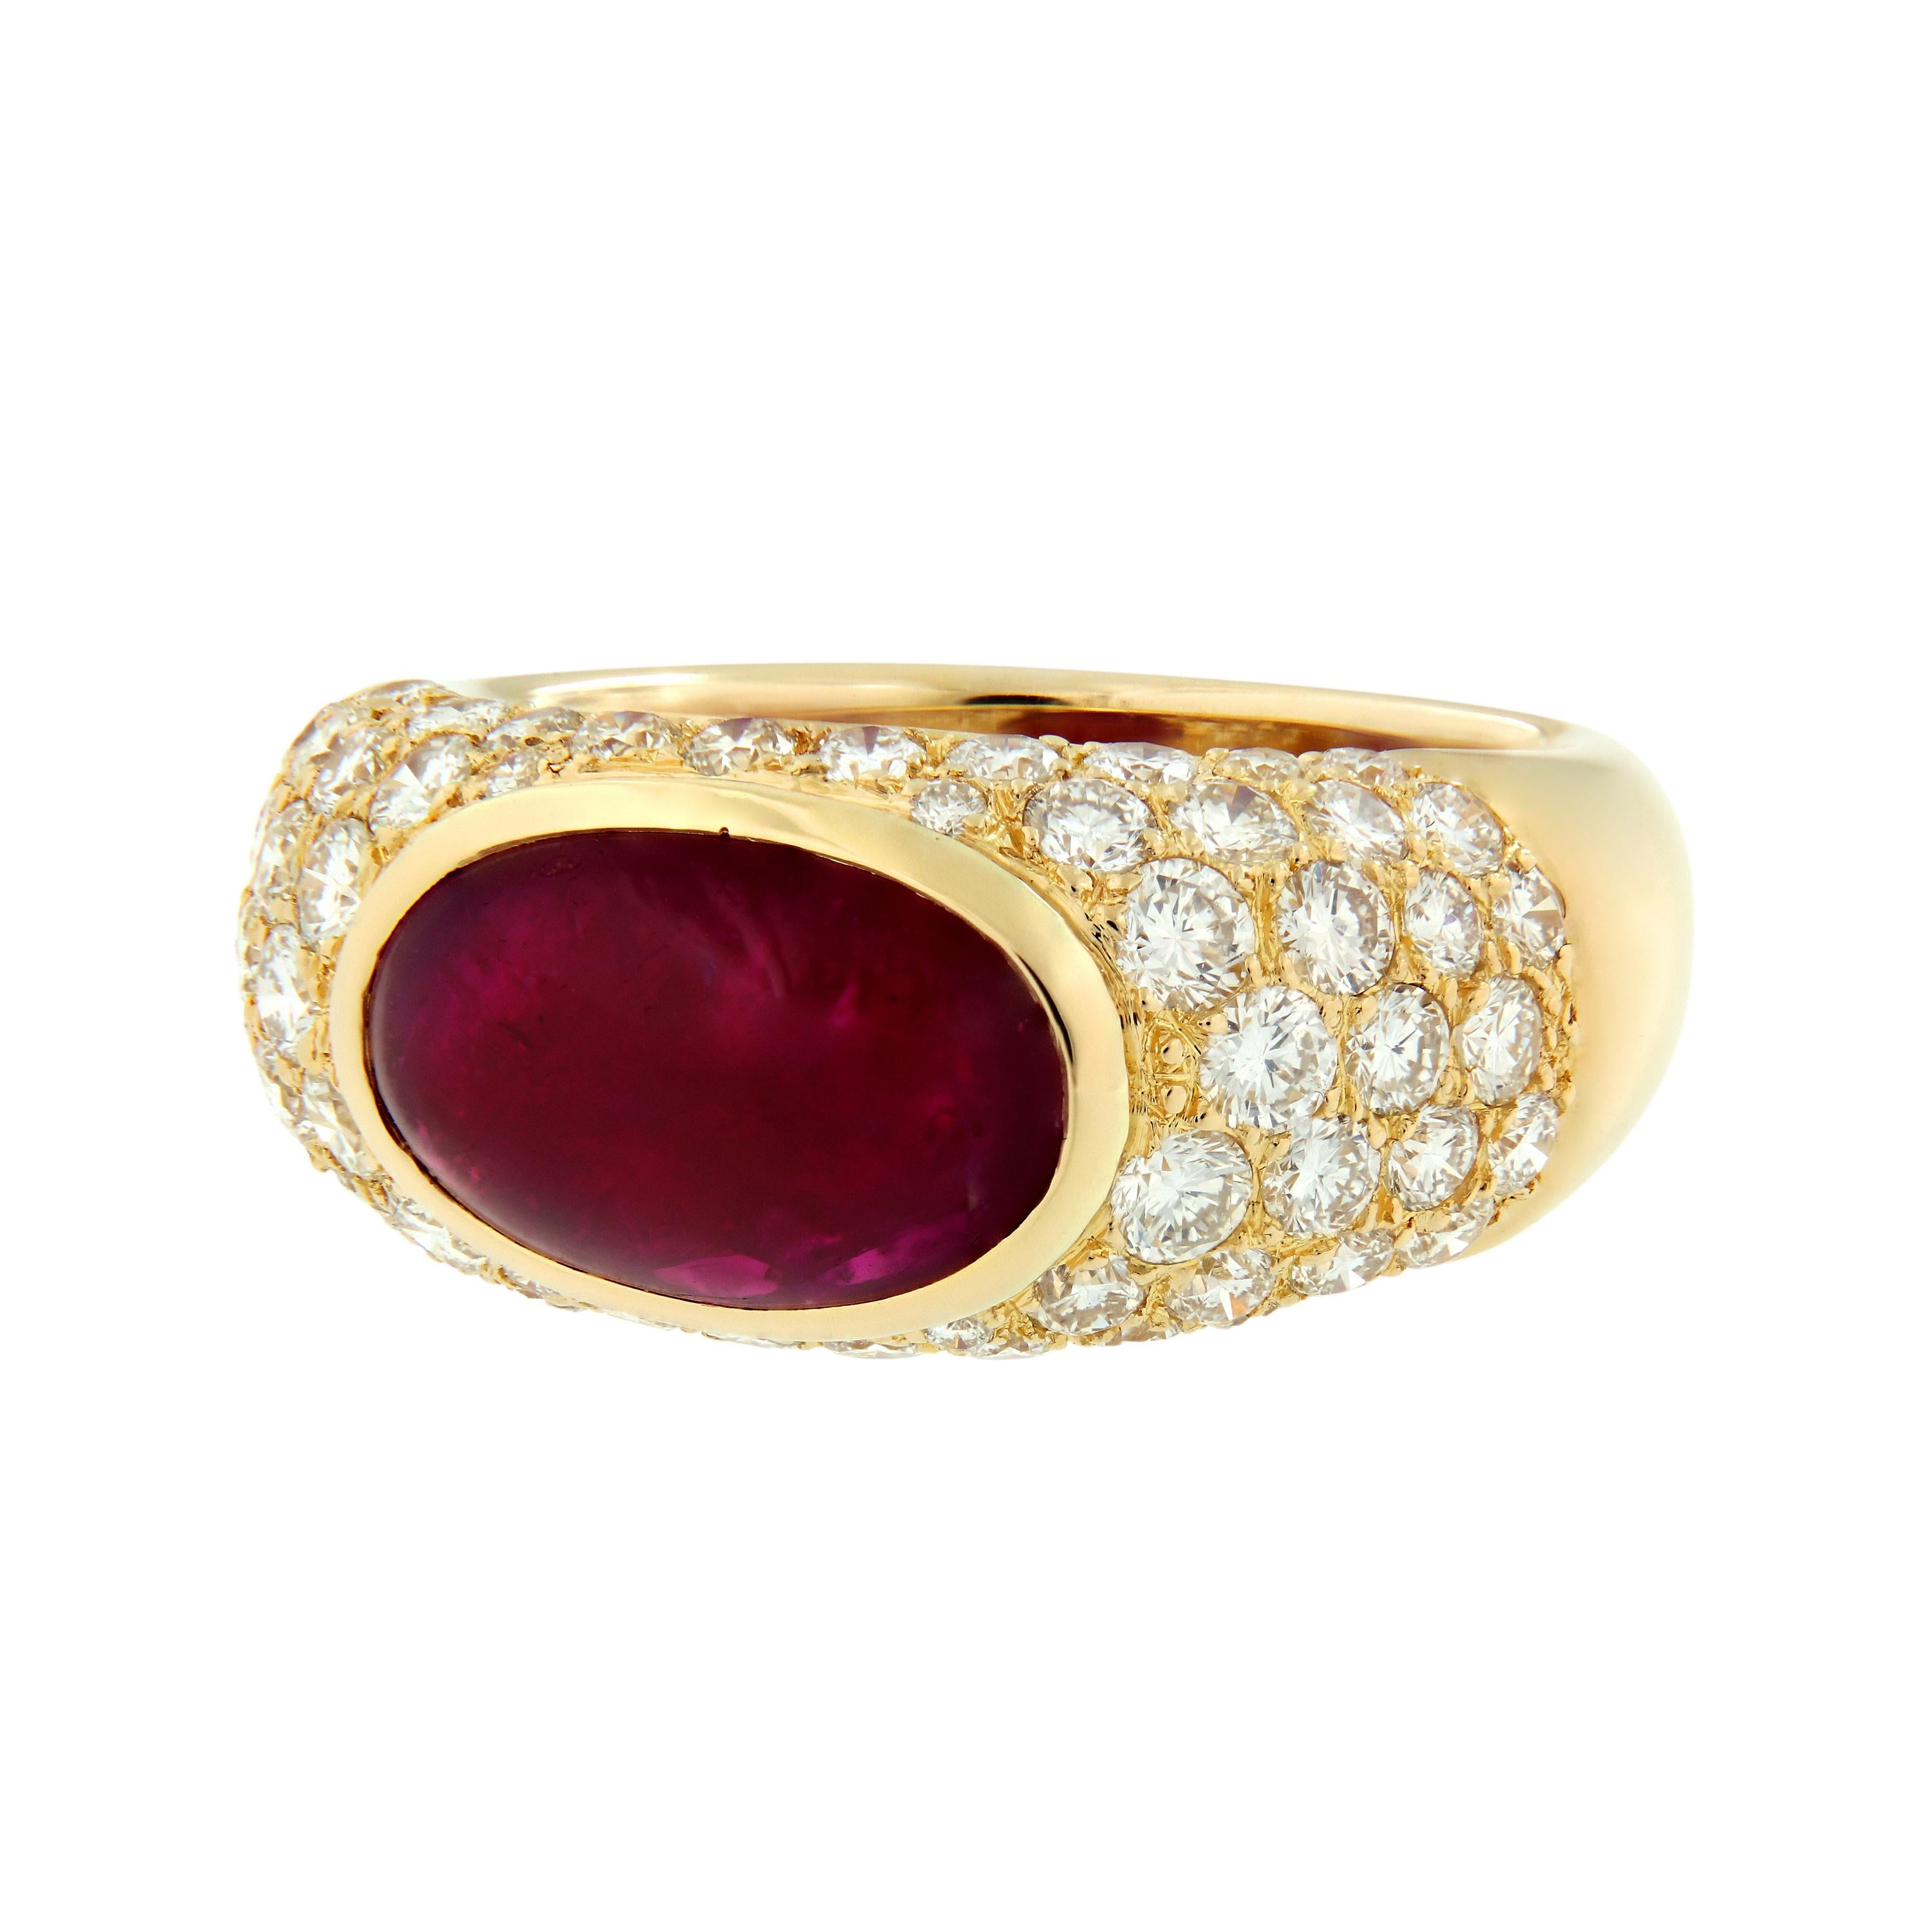 This pretty 18k yellow gold dome ring centers around a bezel-set oval-shaped cabochon ruby weighing over five carats, surrounded by almost two carats of pavé-set round diamonds. Ring size 6 1/4  Weighs 9.1 grams.

Ruby 5.22 ct
Diamond 1.78 cttw G-H